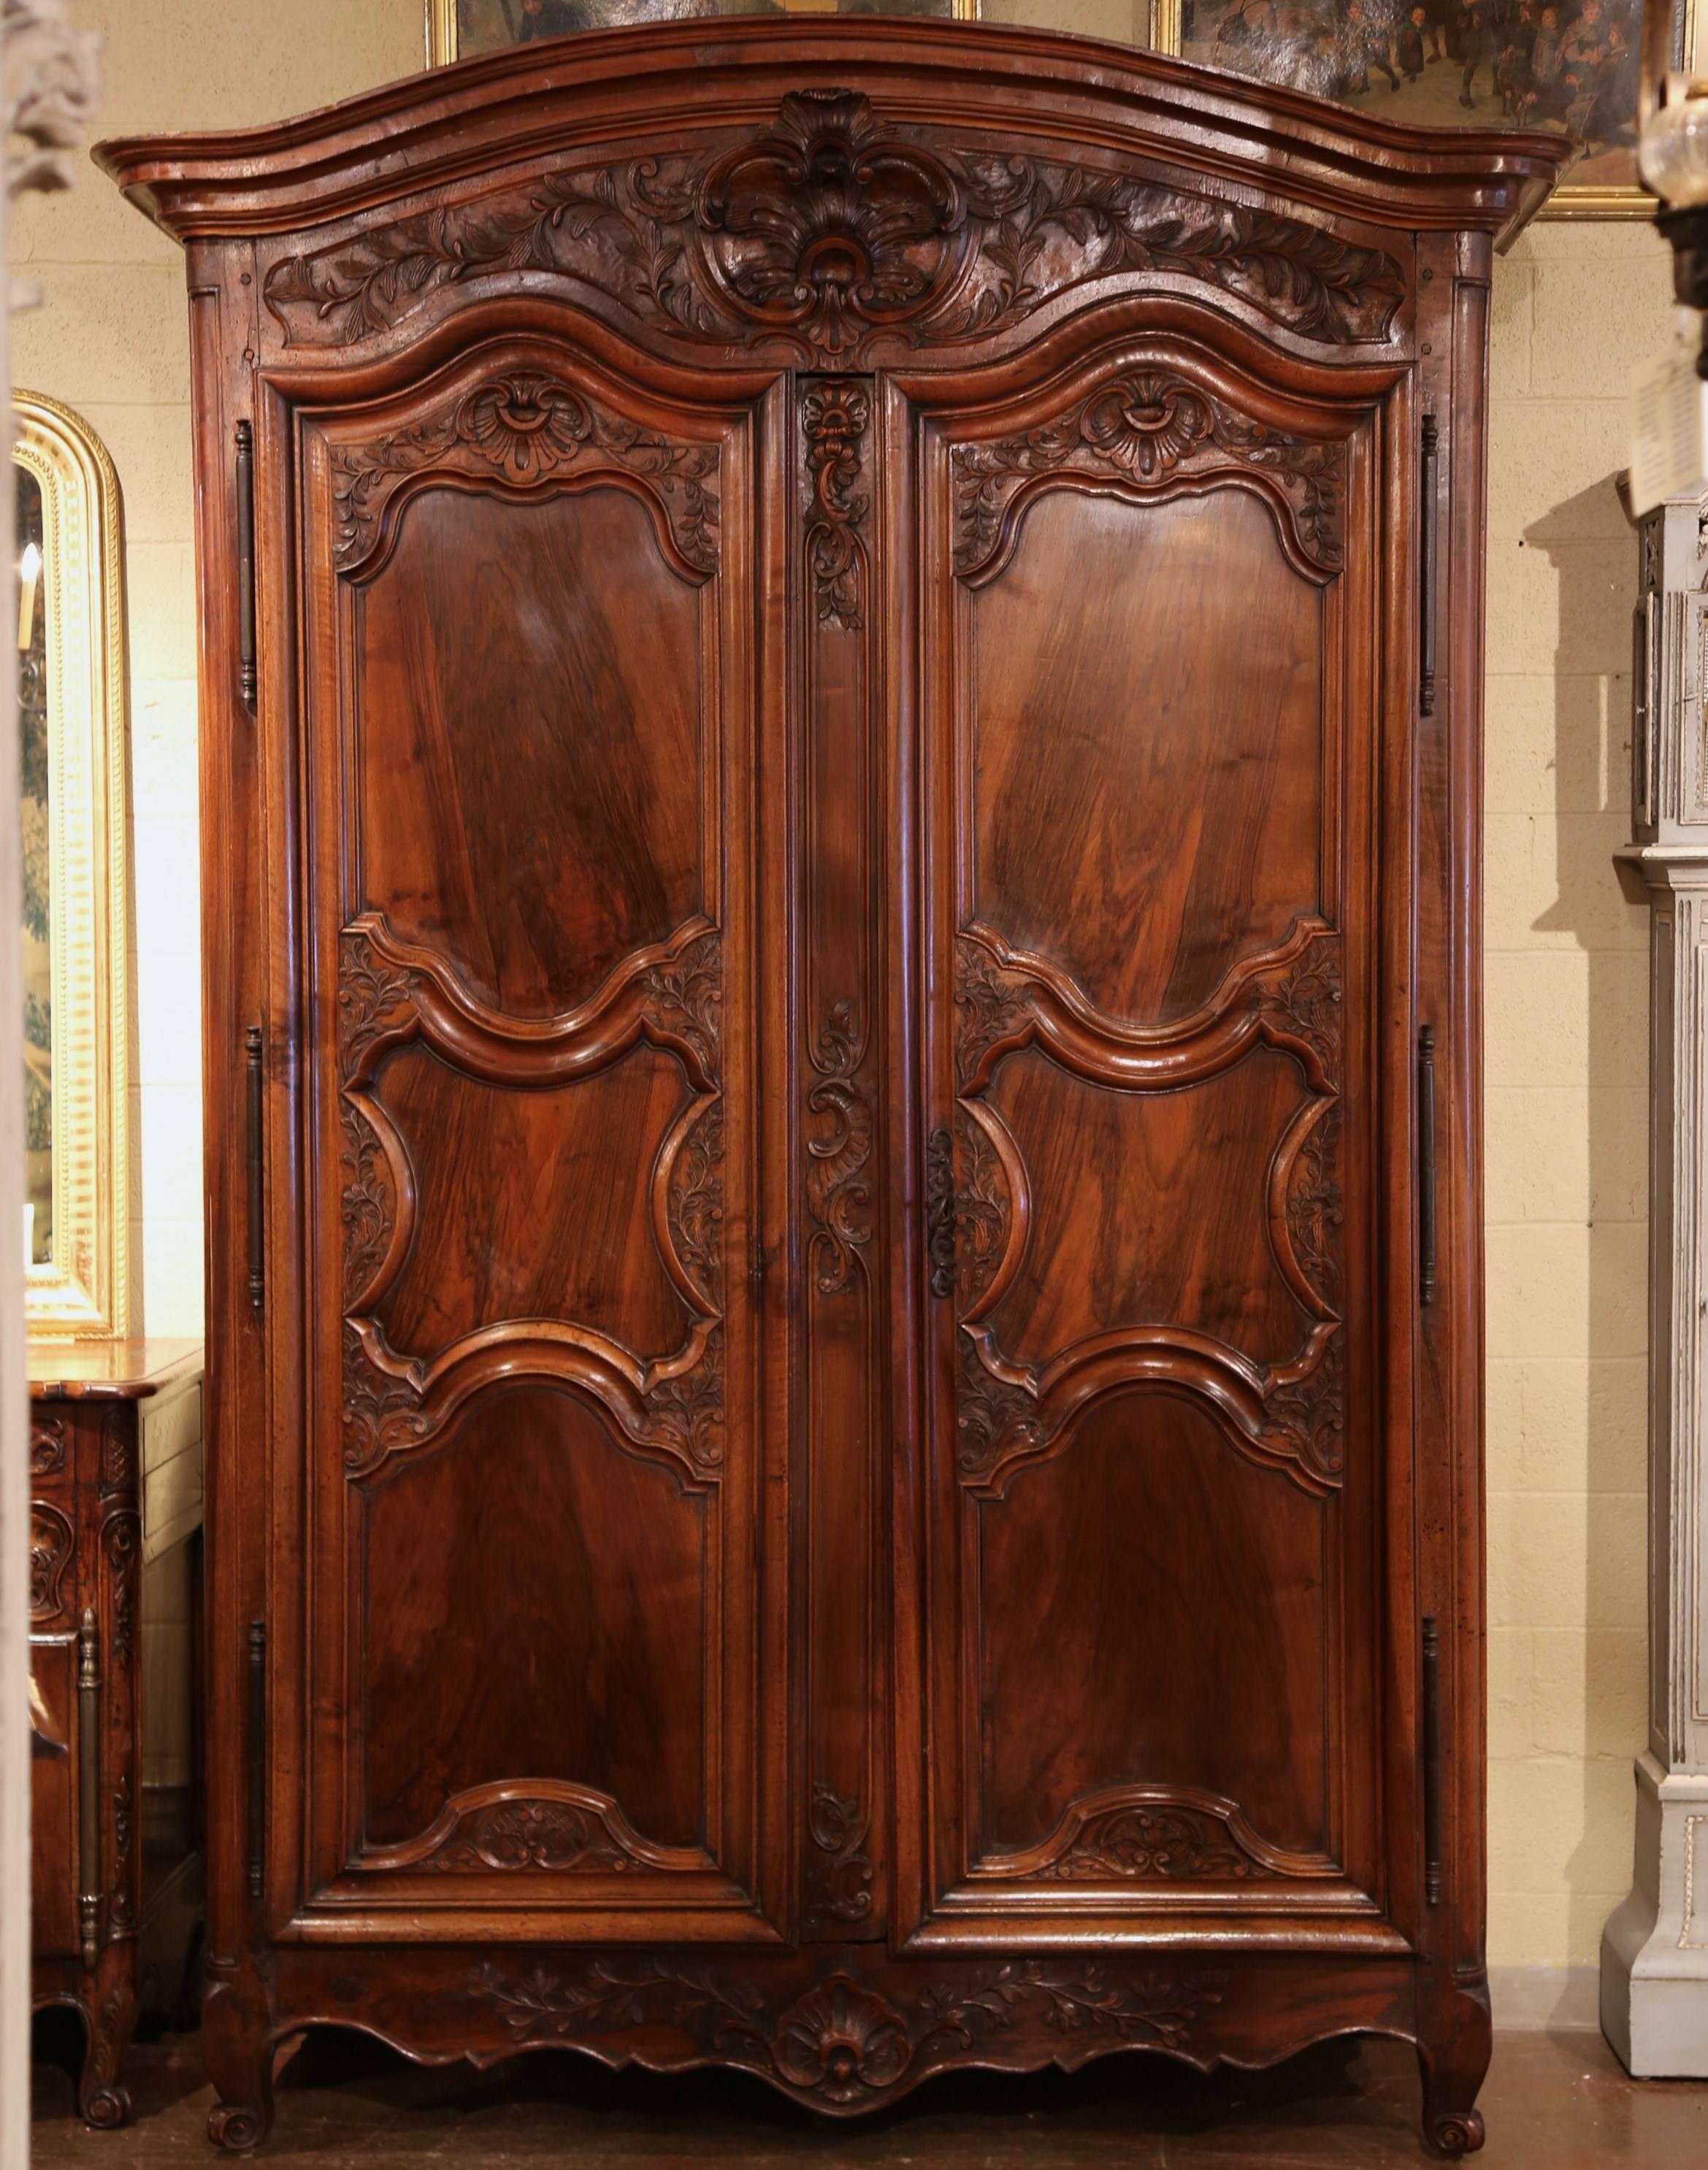 Add the elegance of old world France to your home with this tall, antique 